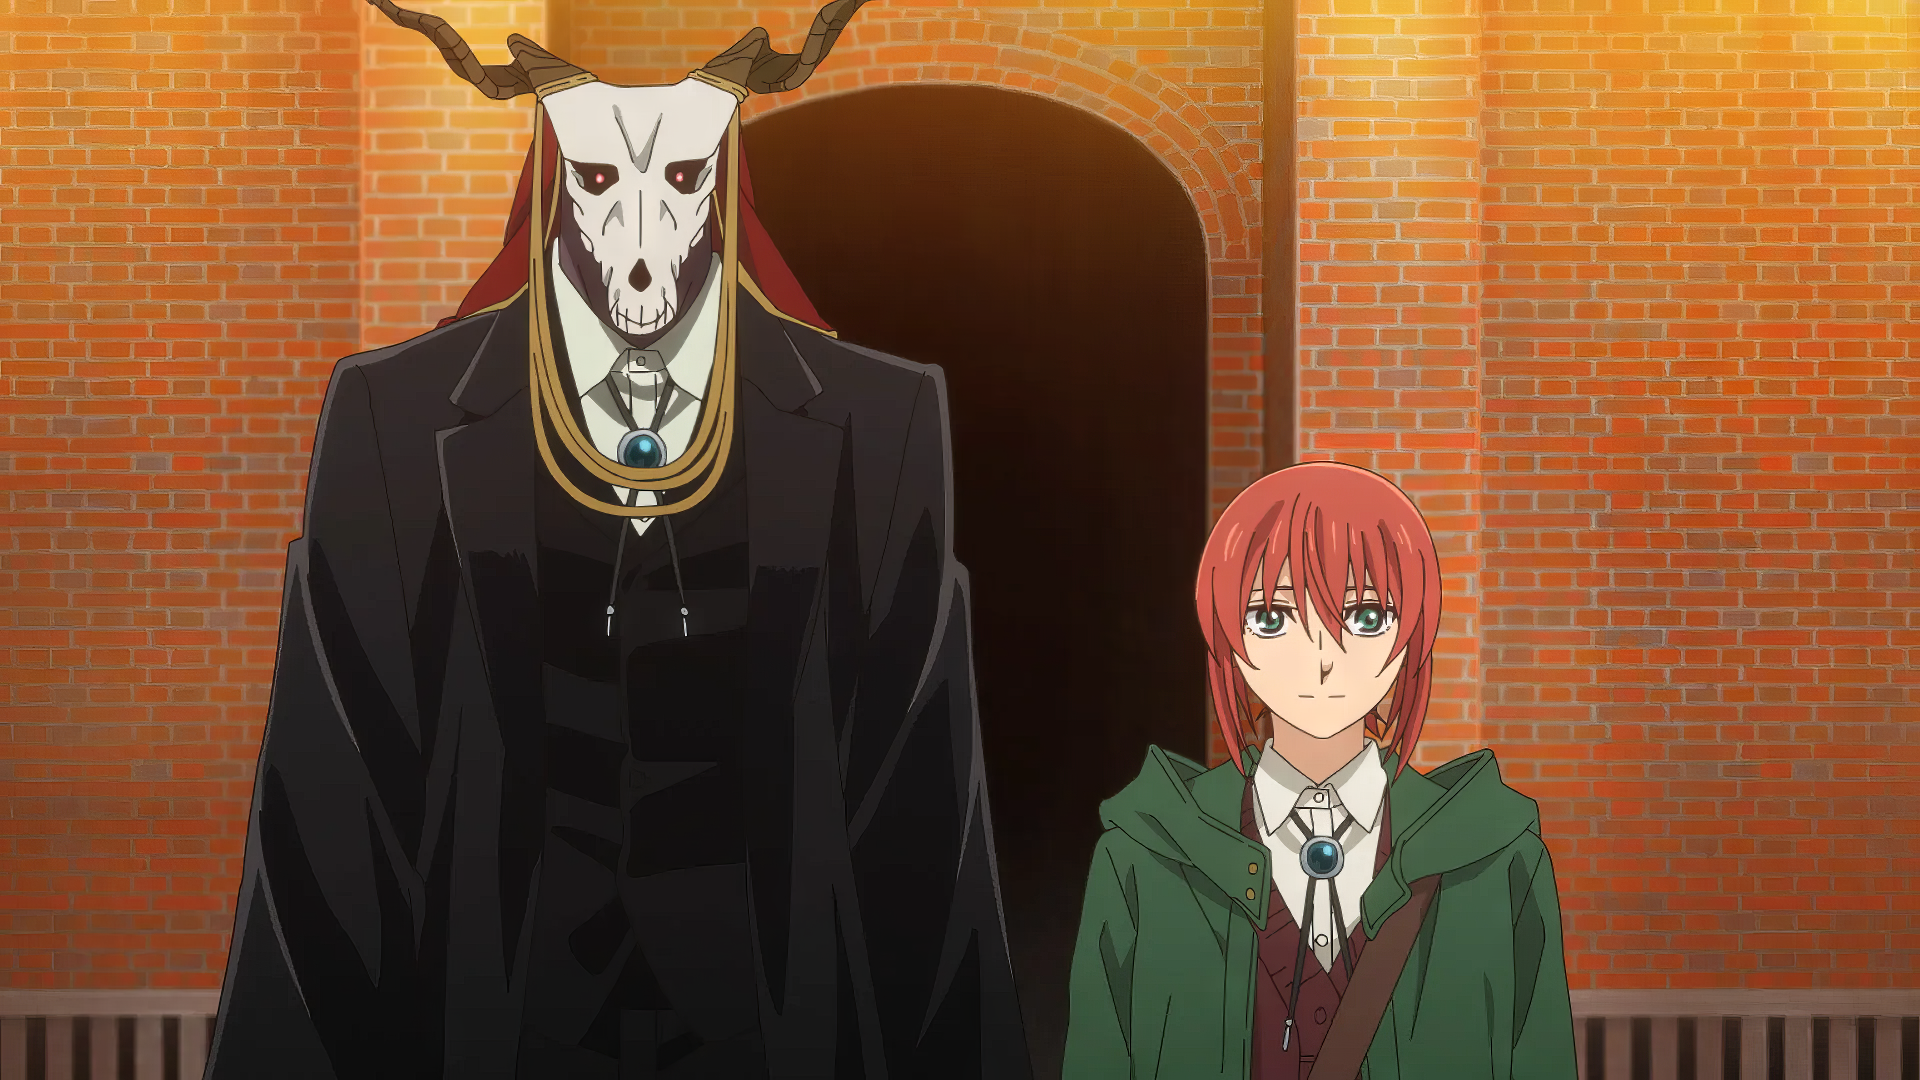 60+ The Ancient Magus' Bride HD Wallpapers and Backgrounds